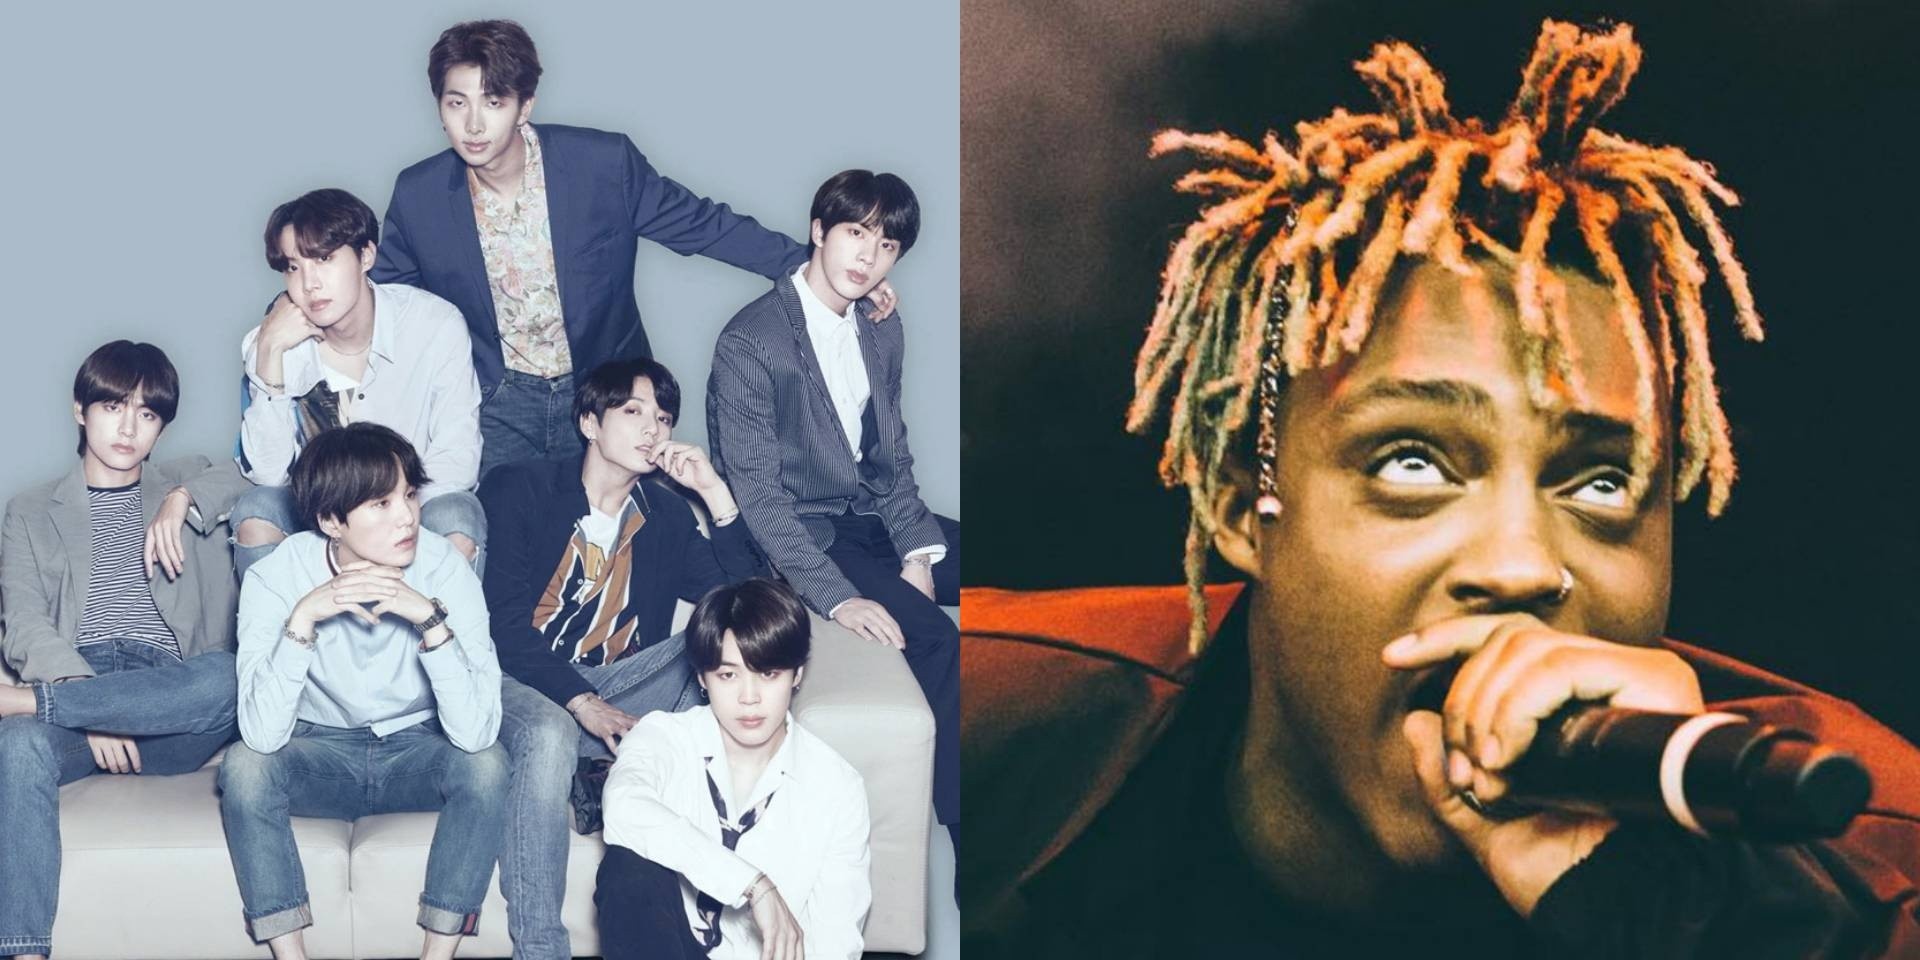 BTS teams up with Juice WRLD for new single, 'All Night' – listen